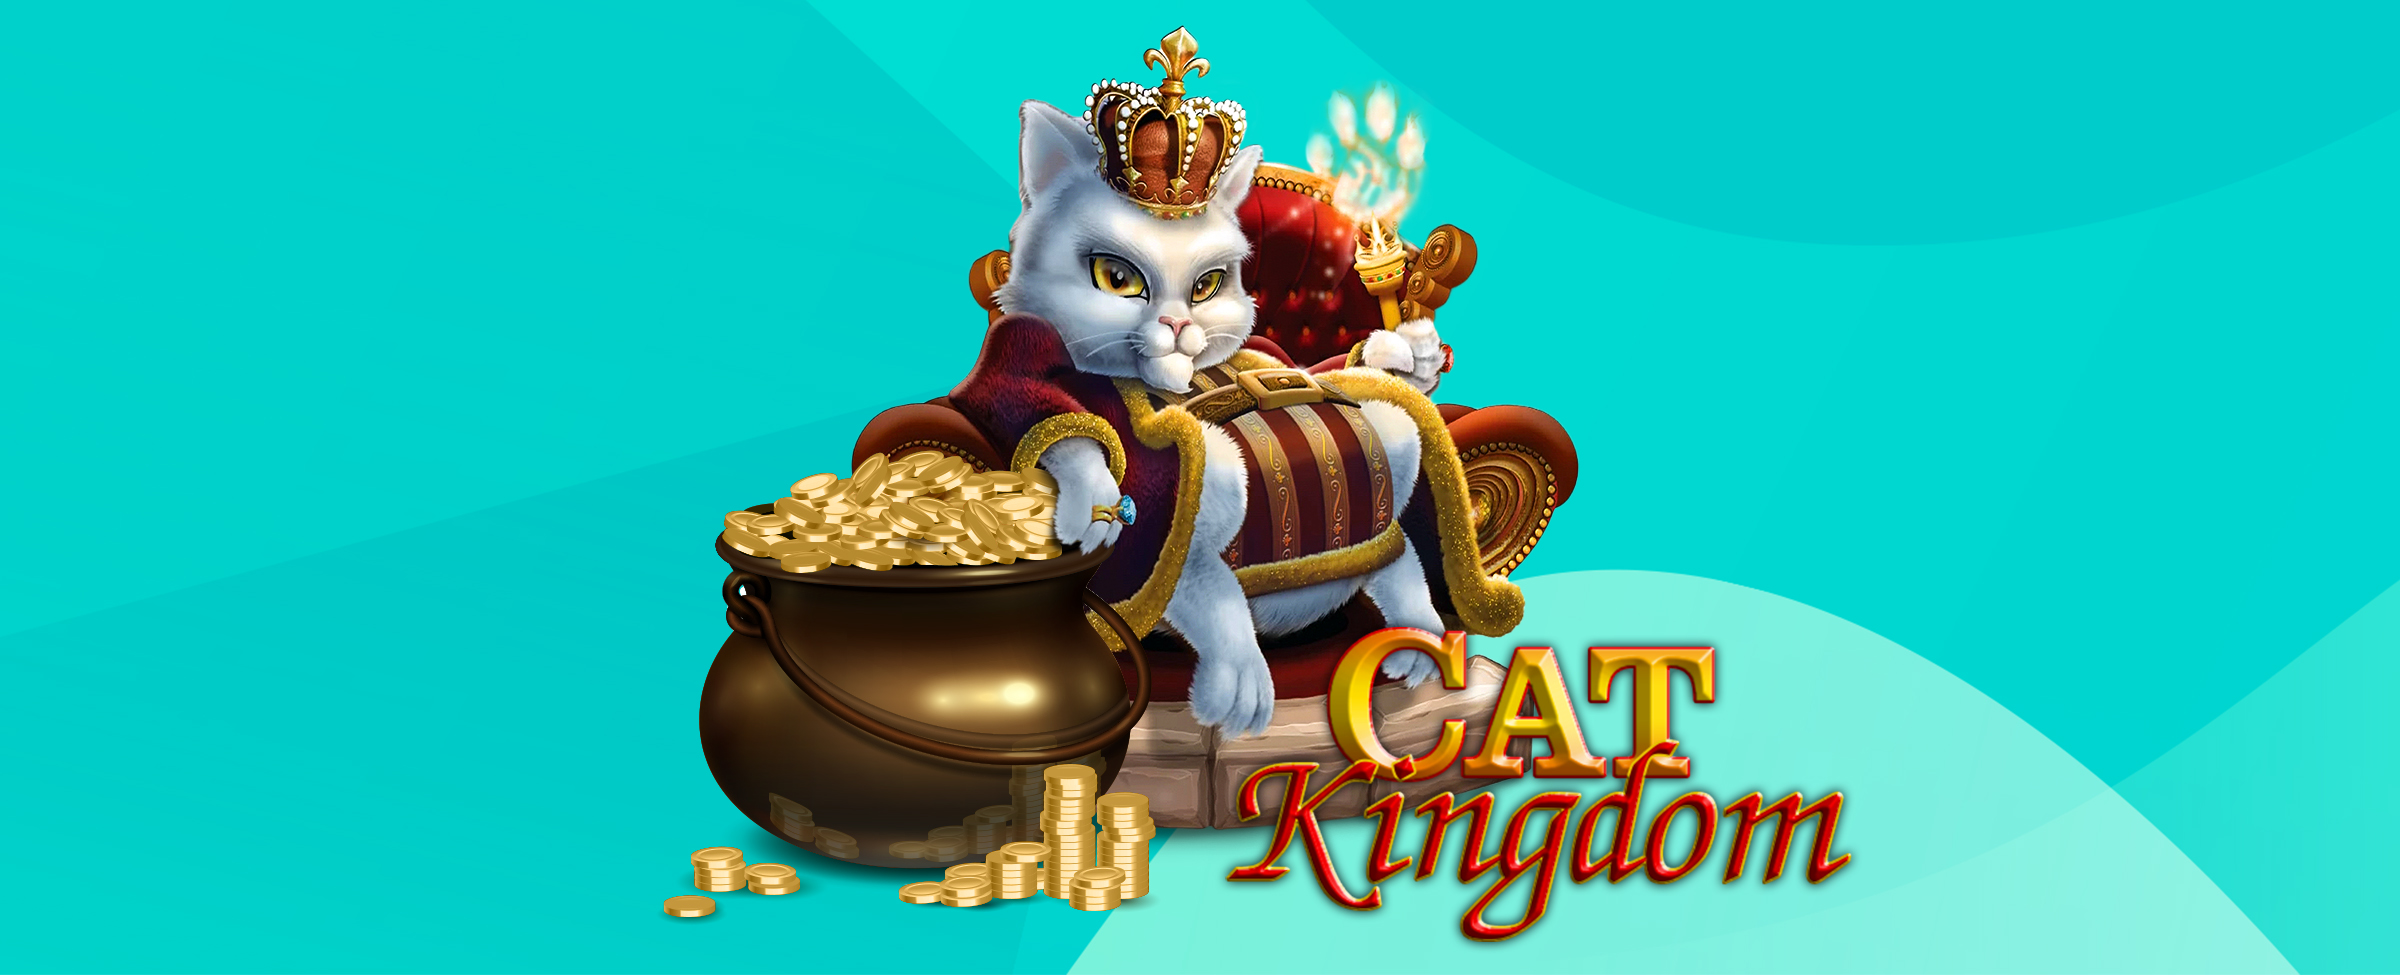 Are you ready for Cat Kingdom? You will be in no time after our quick-fire intro. Check it out.